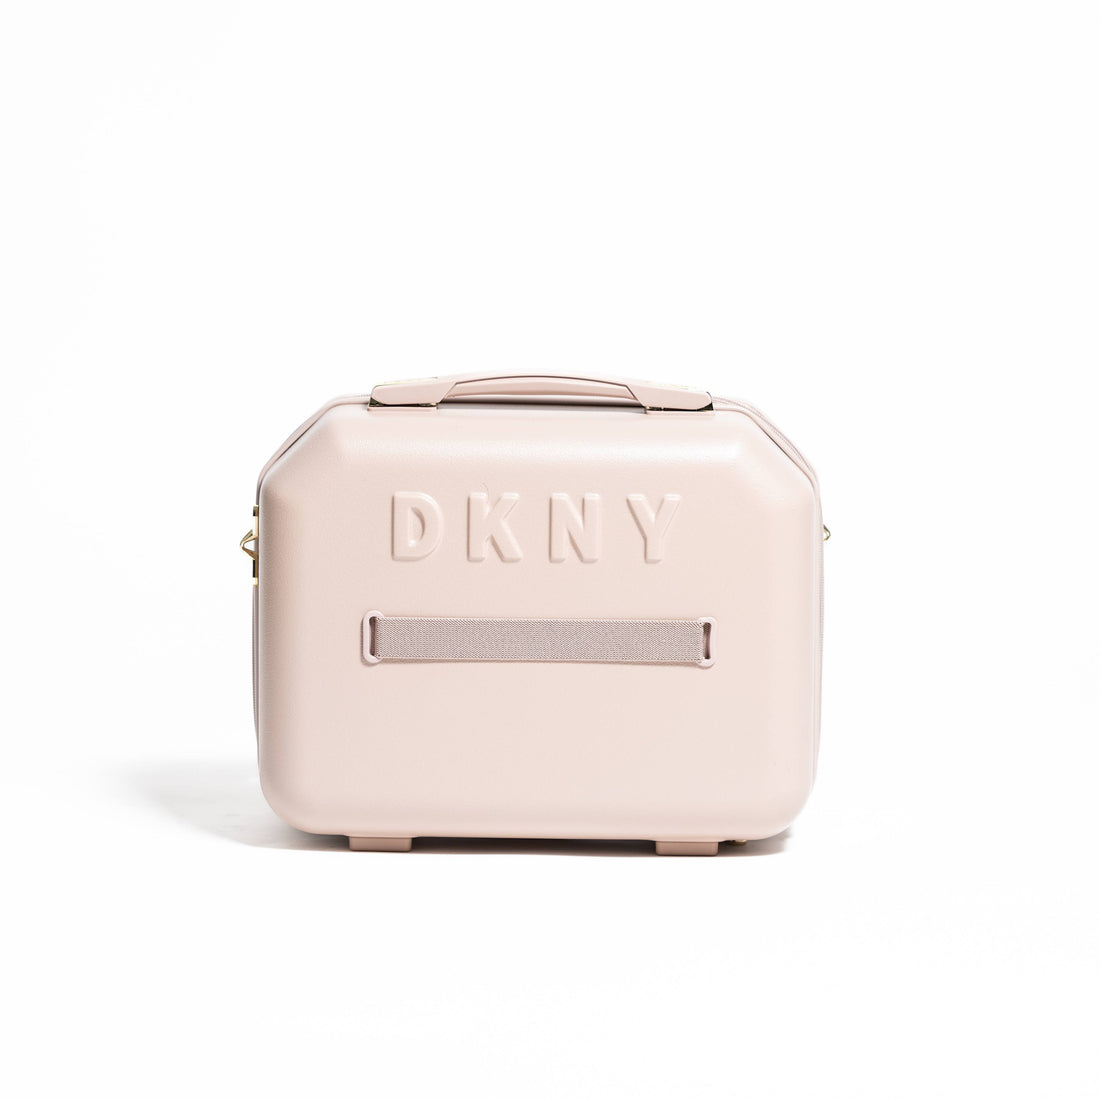 DKNY Champagne Beauty case_DH060ML0_CHP_02